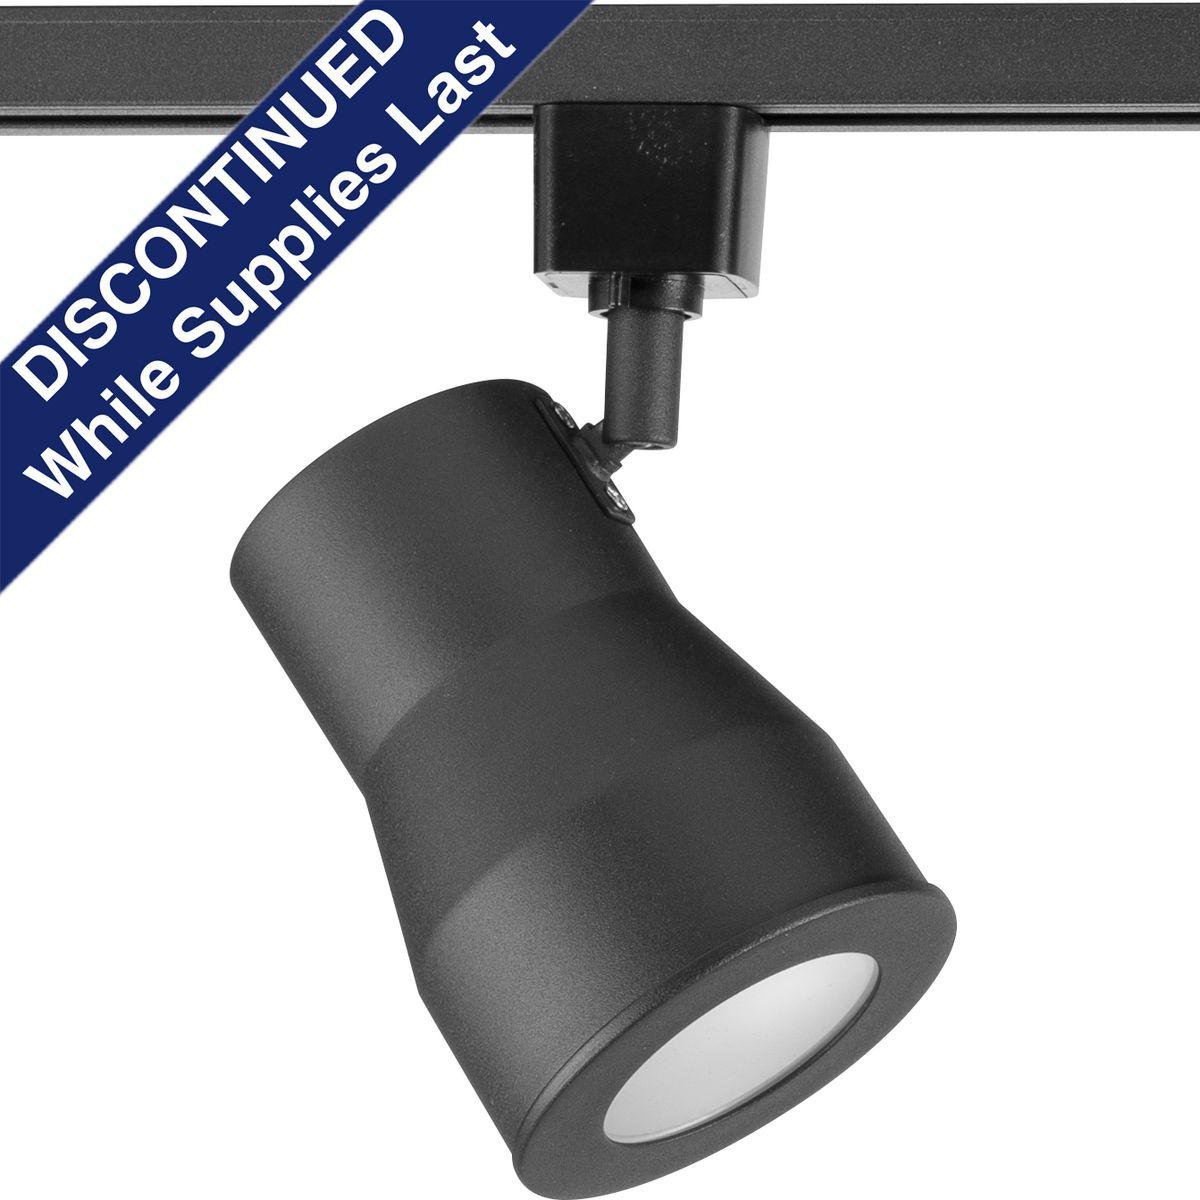 Hubbell P900001-031-27 The large Black Track Heads are compatible with the P900003-031-27 Track Kits. These AC LED Track Heads can be added to a track kit to provide more light when needed. They are 2700K color temperature with a 90+ CRI.  ; 120V AC LED Track Head ; Additional 